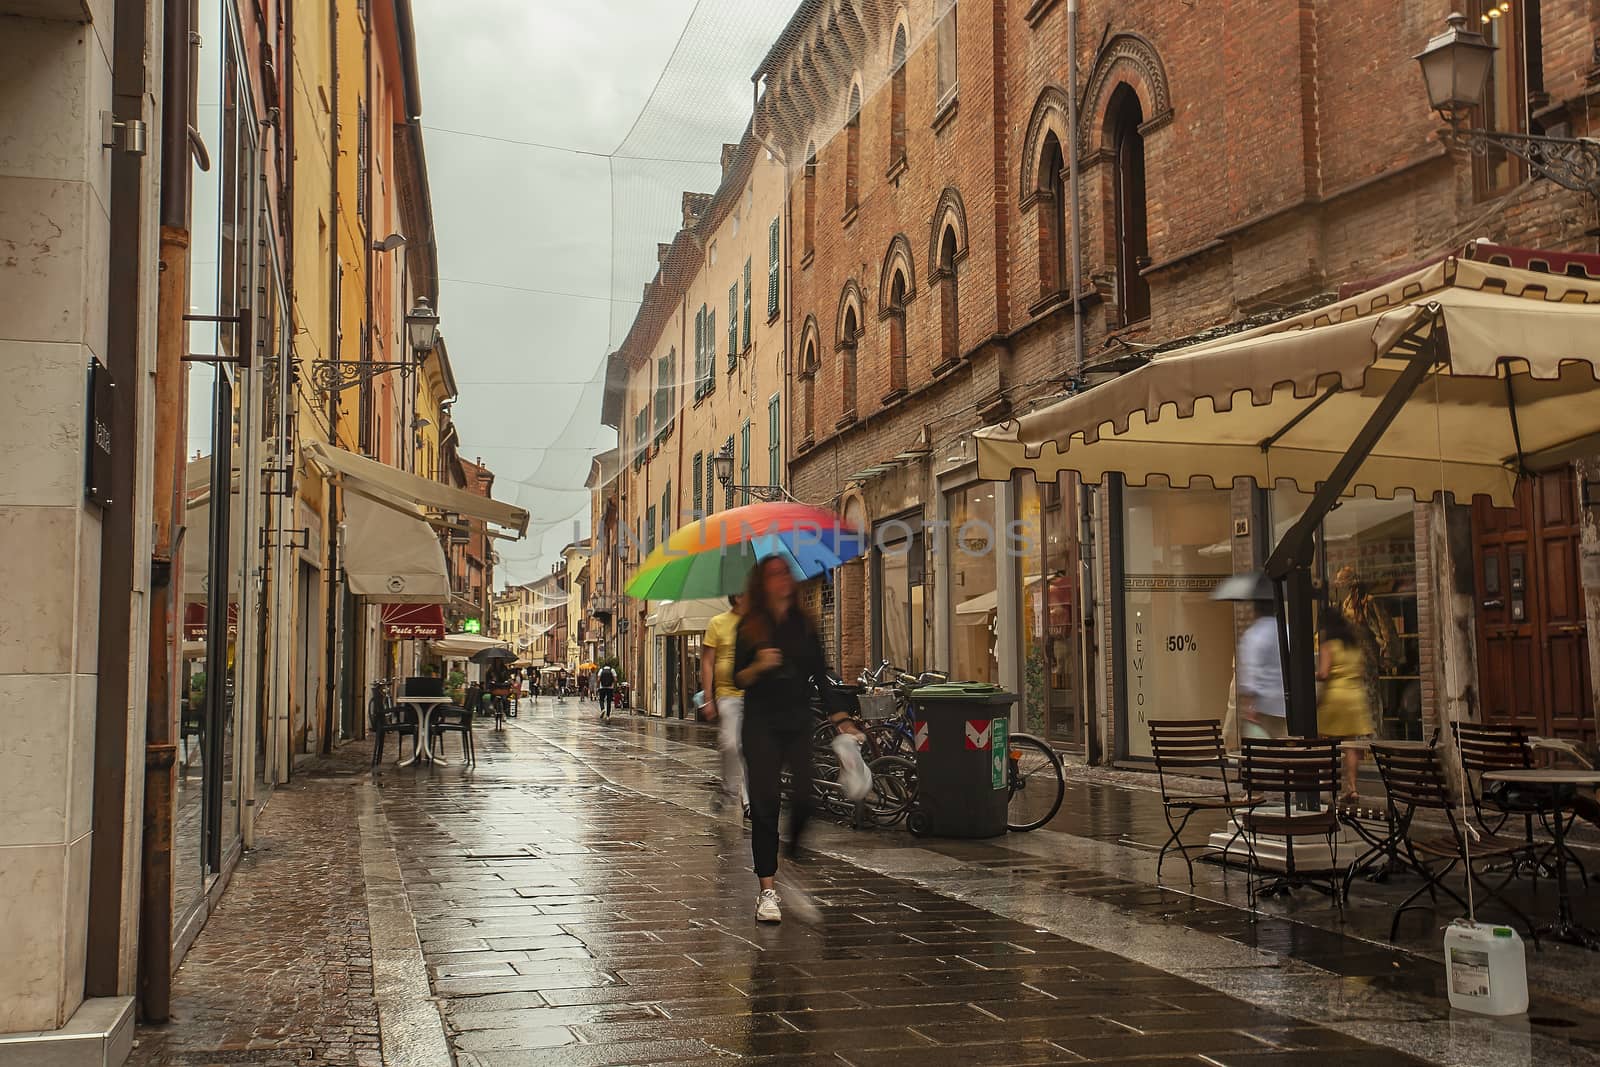 Evocative view of a street in the historic center of Ferrara 2 by pippocarlot